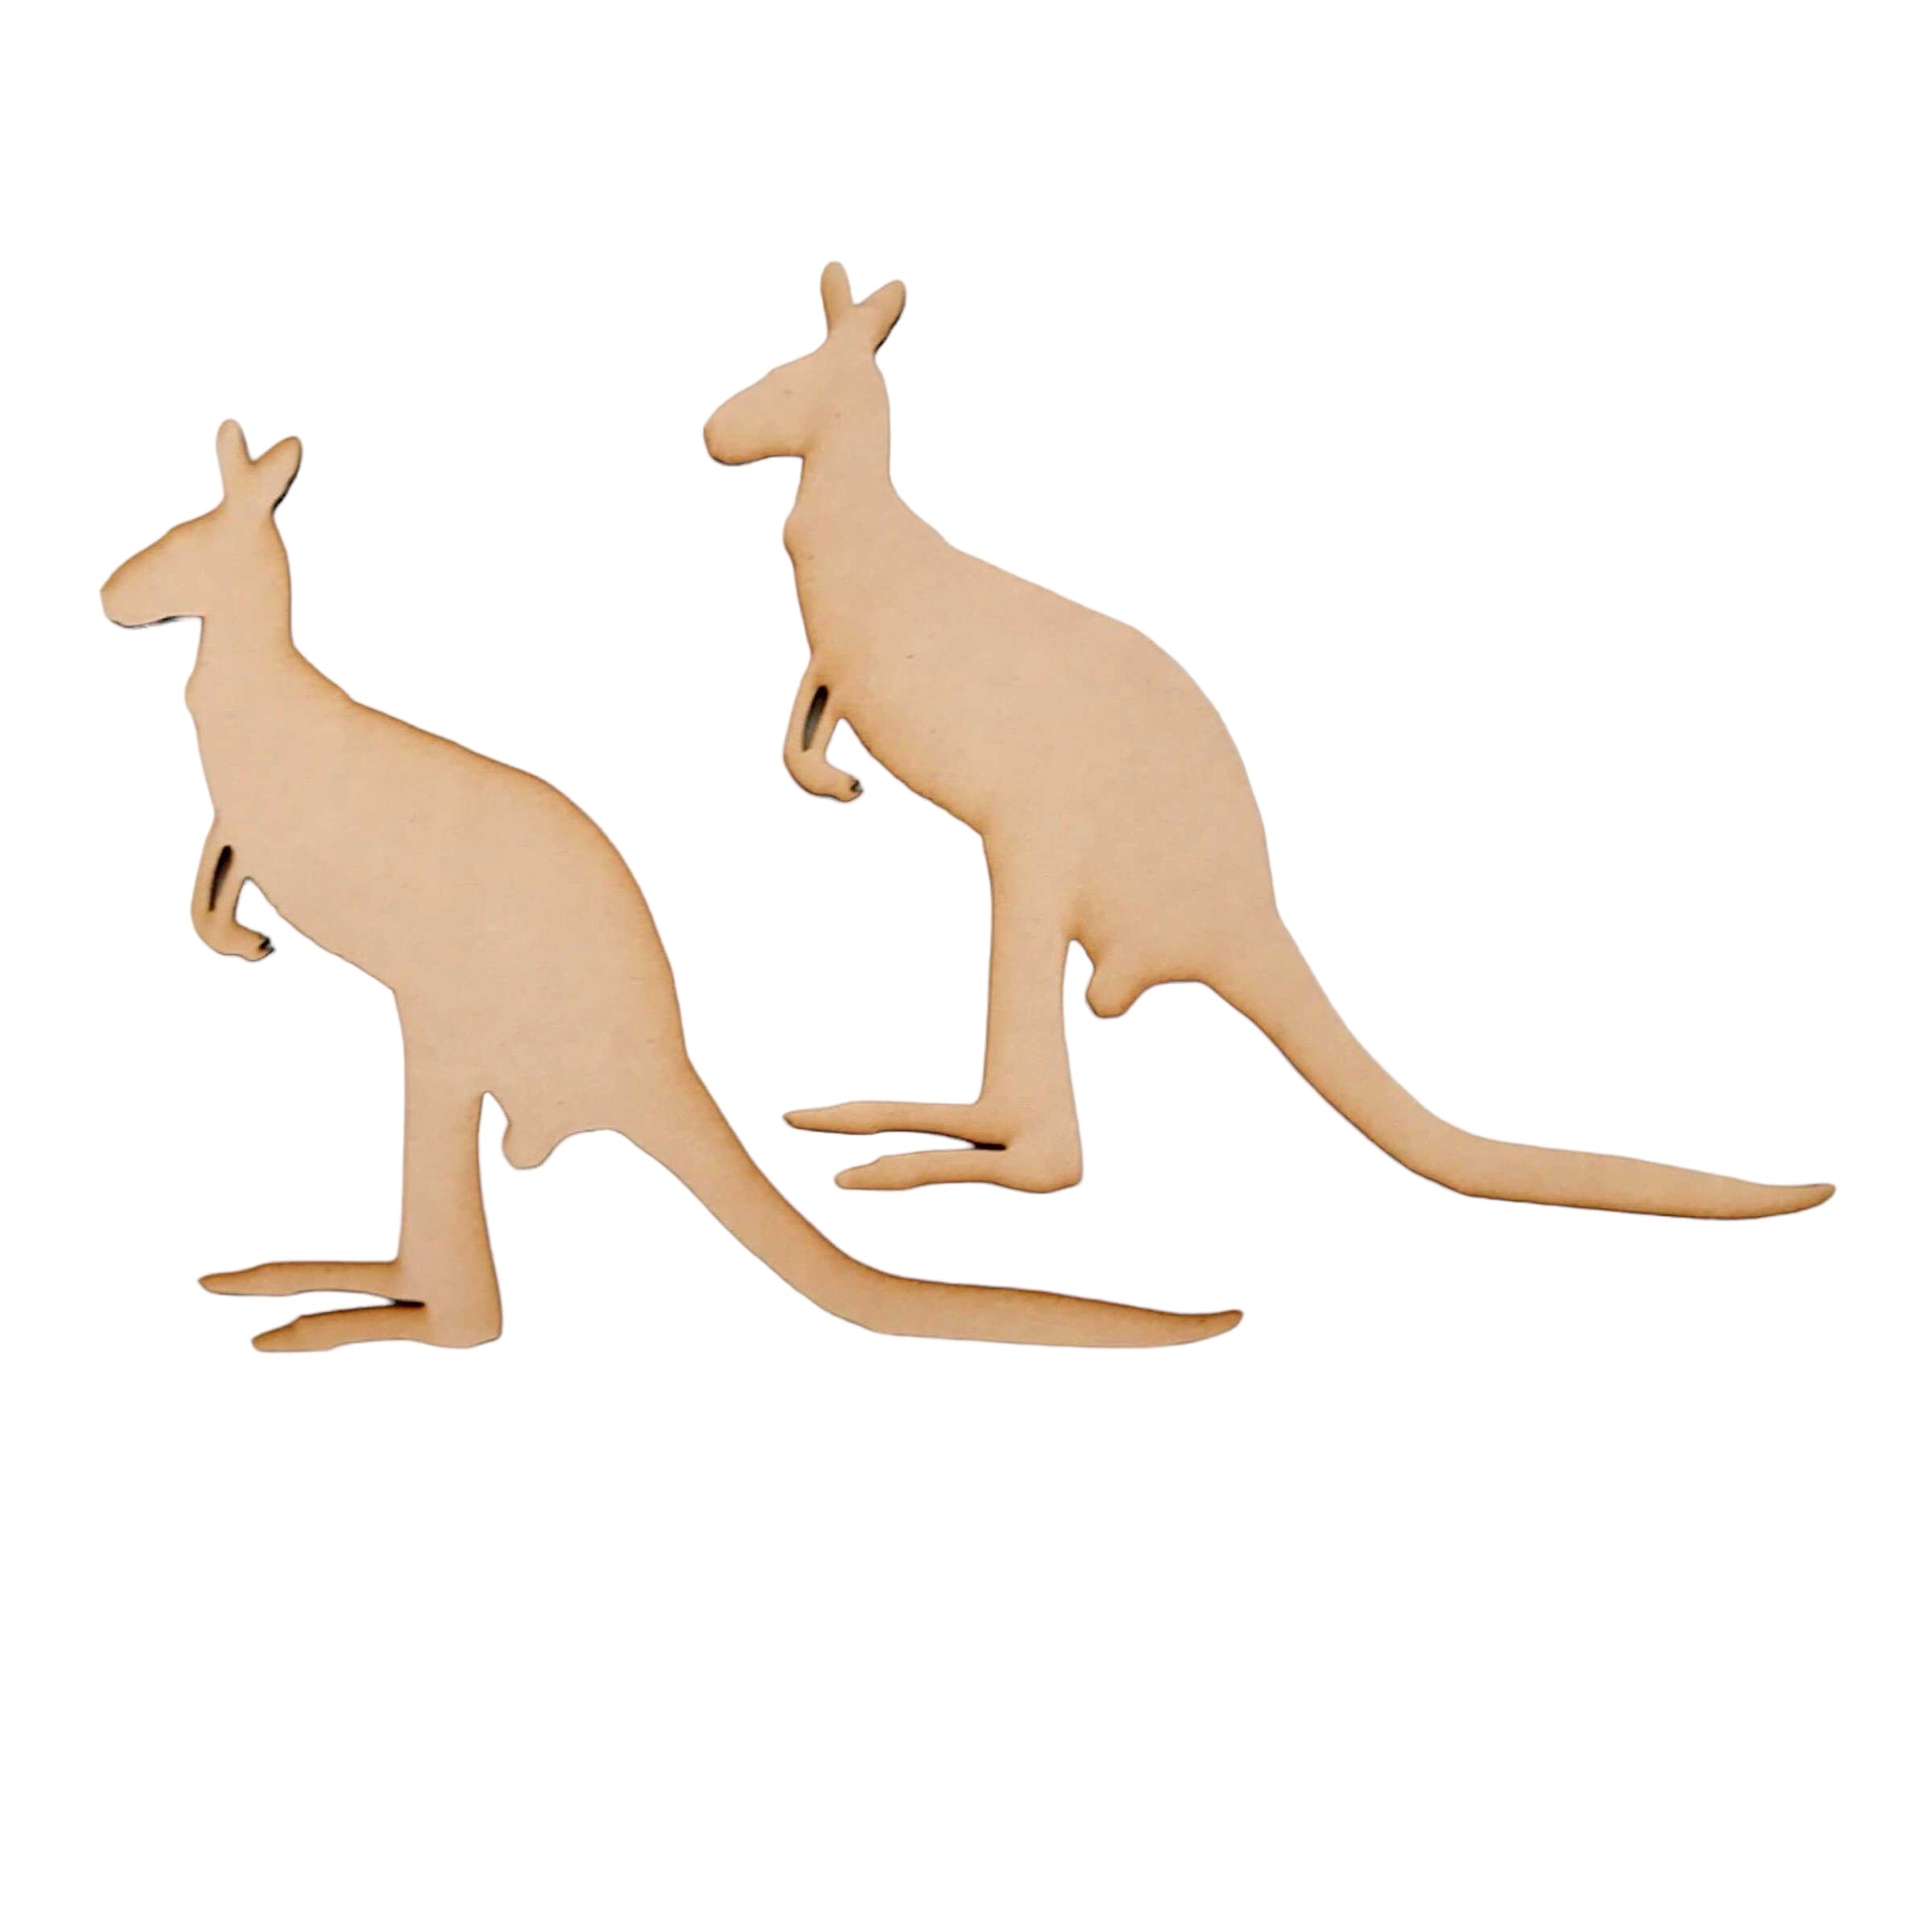 Kangaroo Set of 2 MDF DIY Raw Cut Out Art Craft Decor - The Renmy Store Homewares & Gifts 